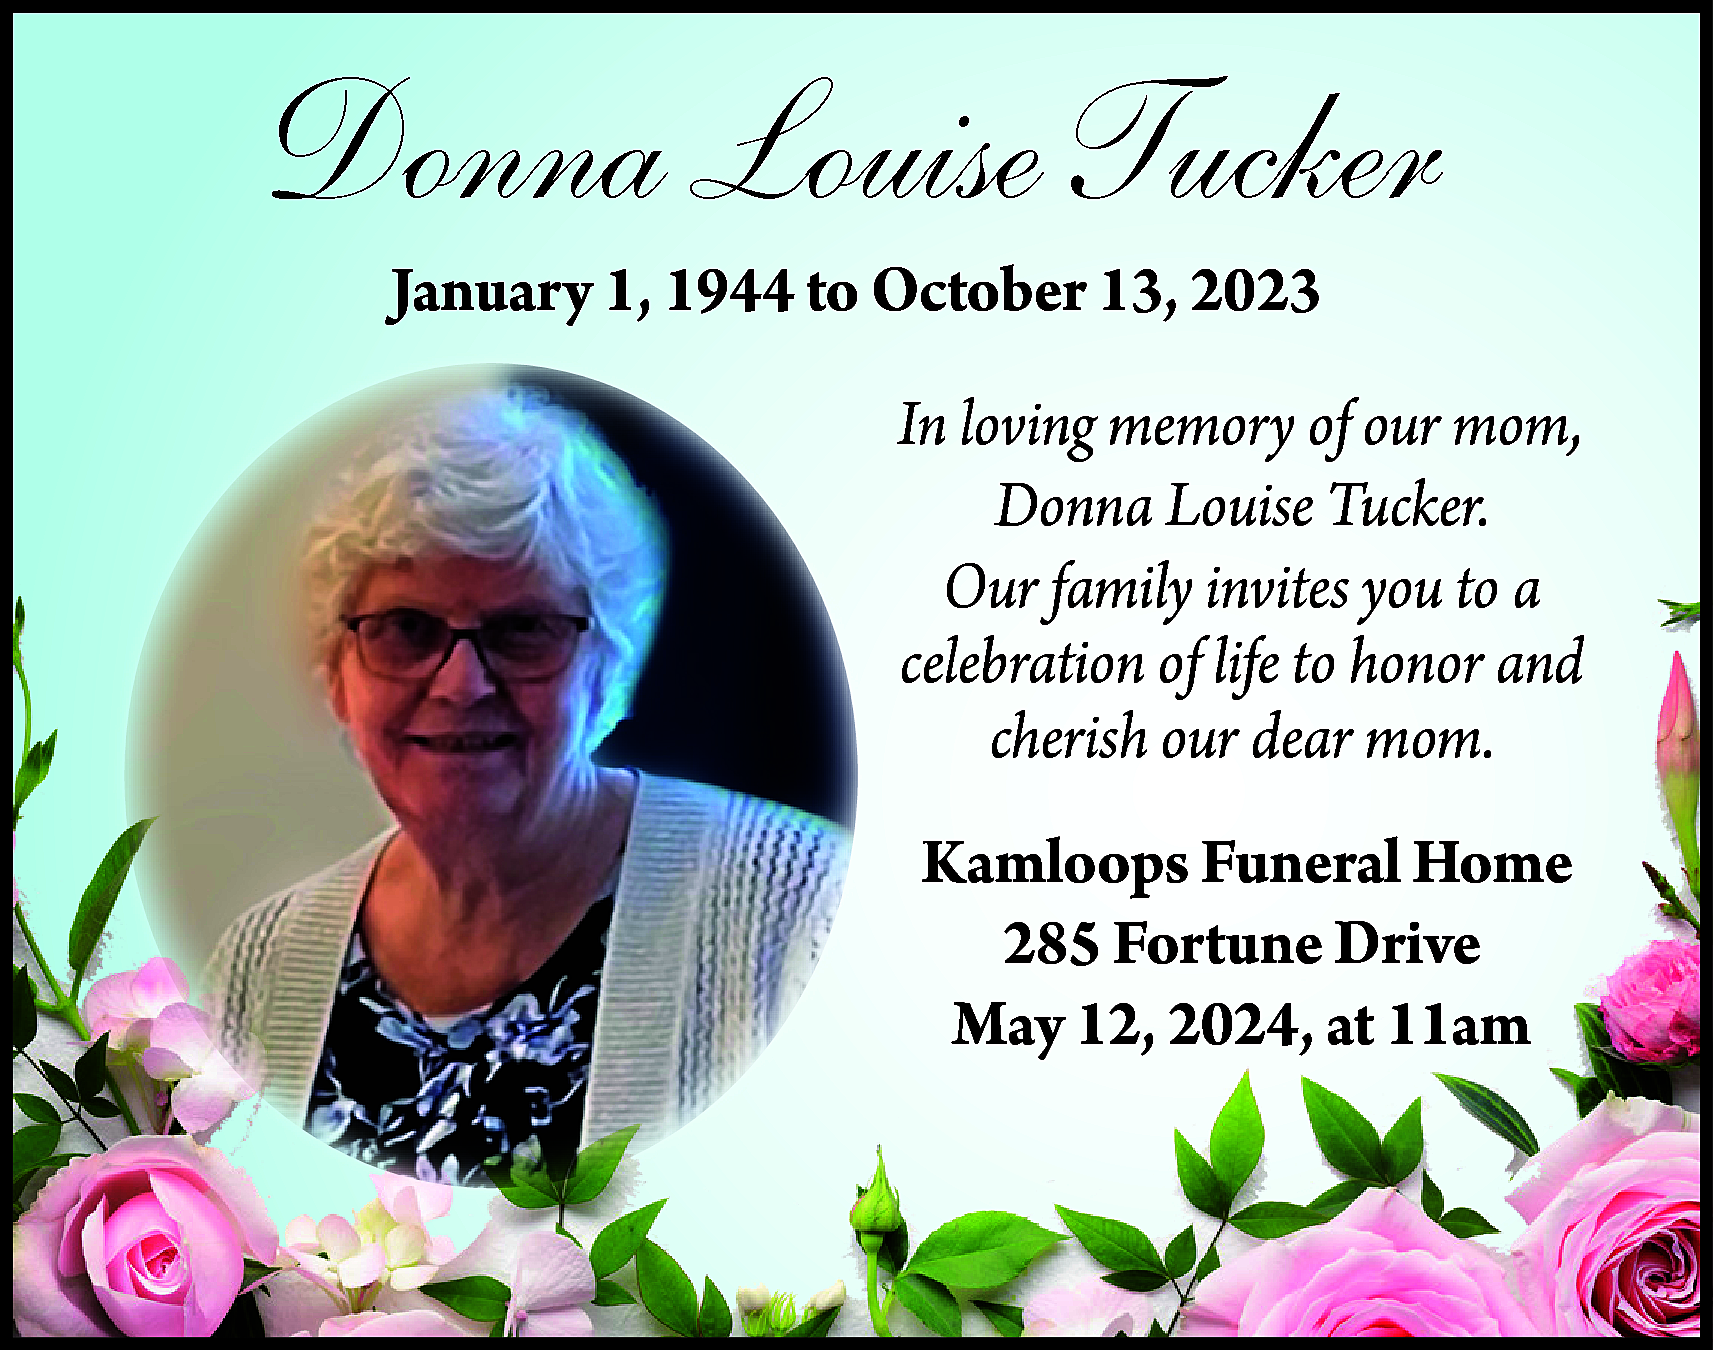 Donna Louise Tucker <br>January 1,  Donna Louise Tucker  January 1, 1944 to October 13, 2023    In loving memory of our mom,  Donna Louise Tucker.  Our family invites you to a  celebration of life to honor and  cherish our dear mom.  Kamloops Funeral Home  285 Fortune Drive  May 12, 2024, at 11am    